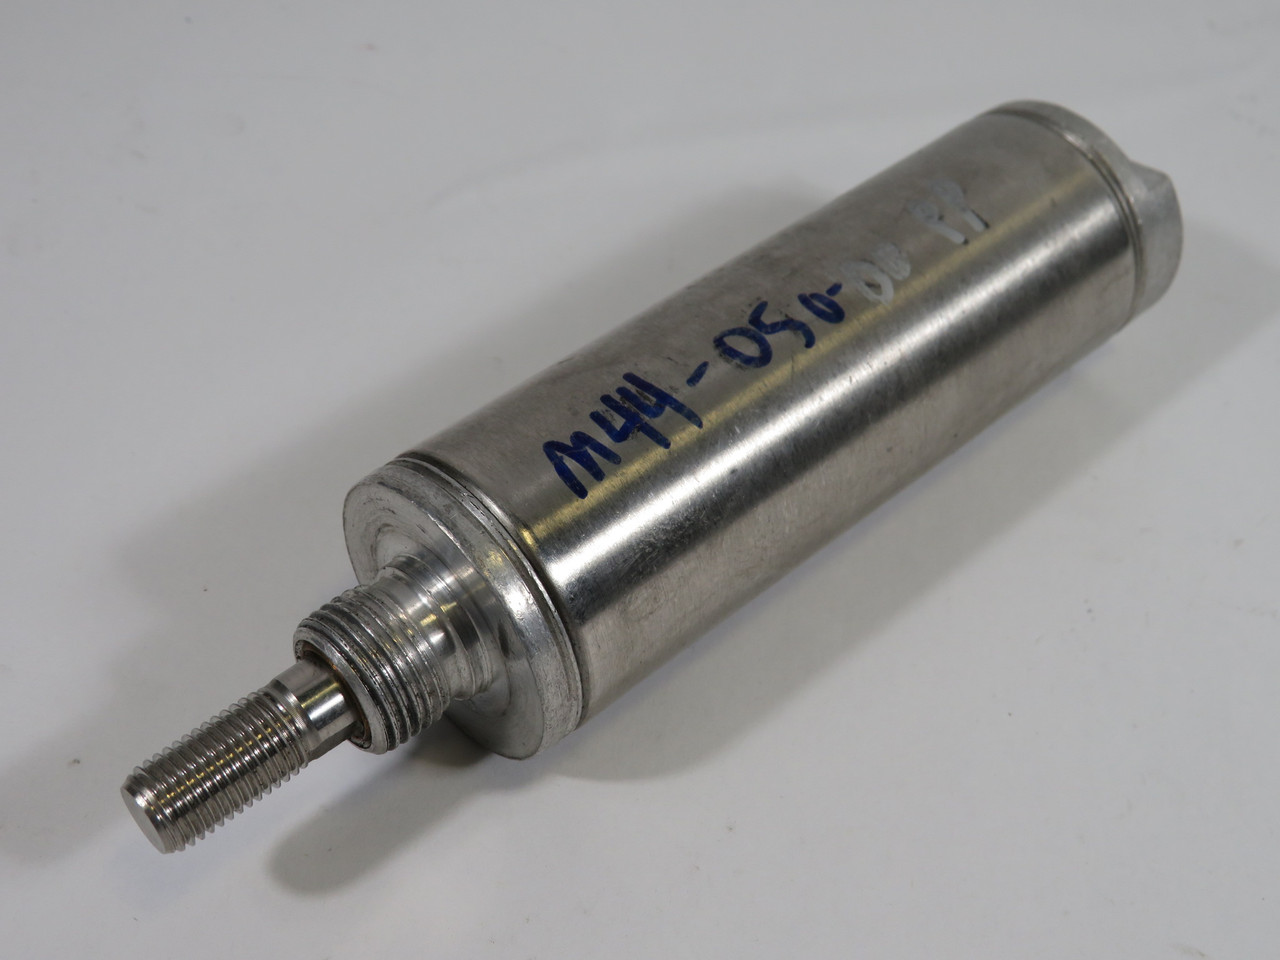 MacNeil D-99272-A-2 Air Cylinder 44-050-00-PP 1-1/2" Bore 2" Stroke USED